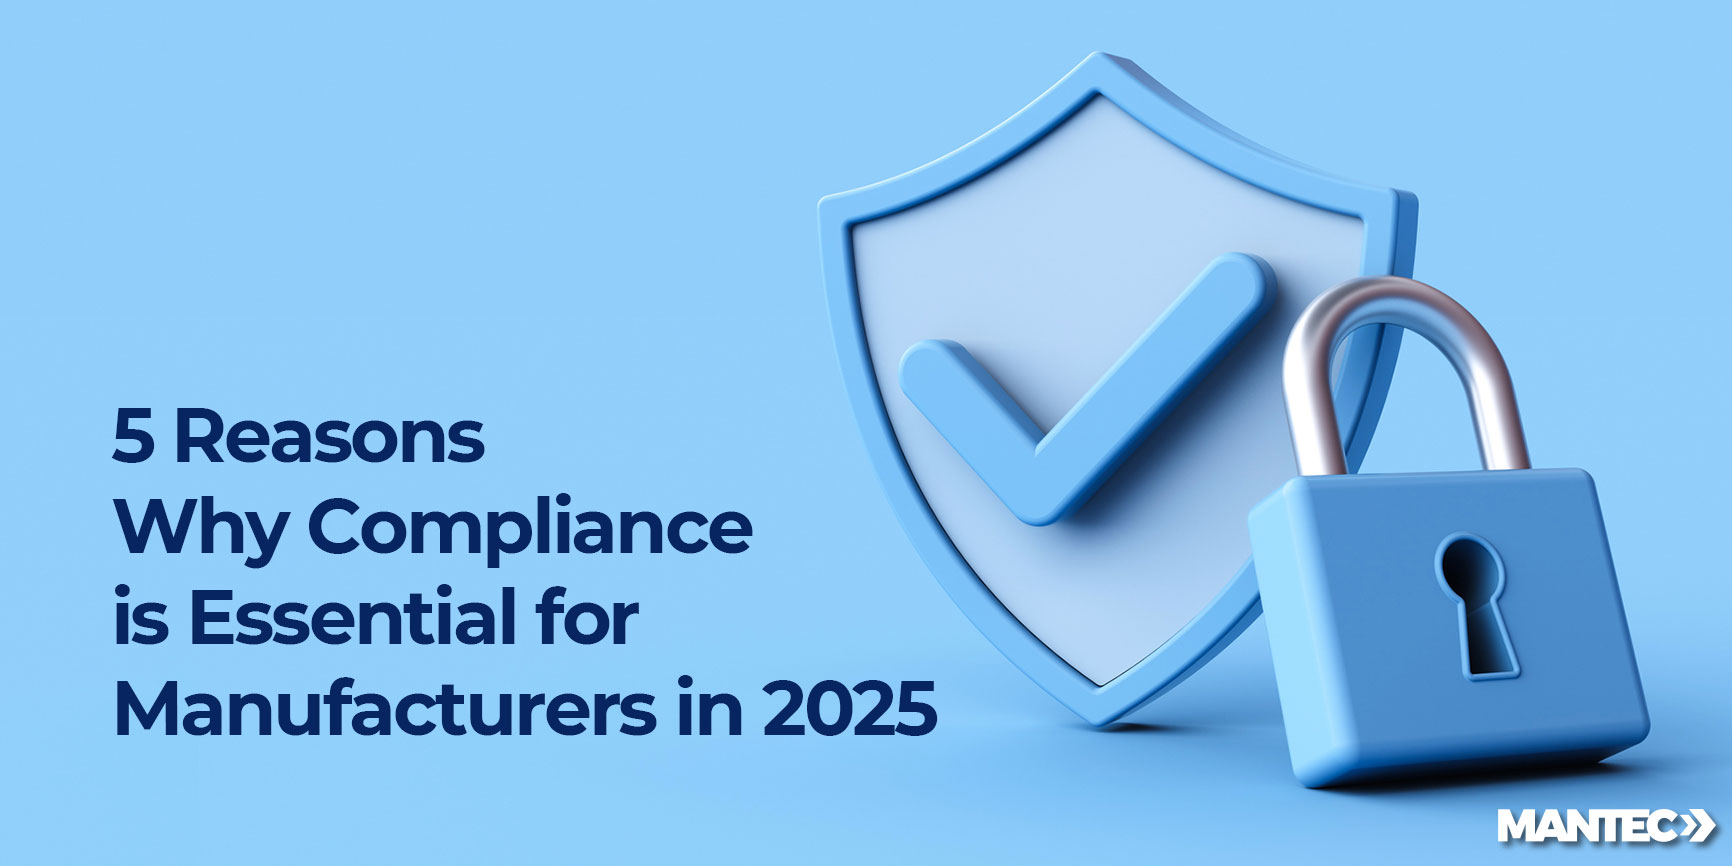 5-Reasons-Why-Compliance-is-Essential-for-Manufacturers-in-2025